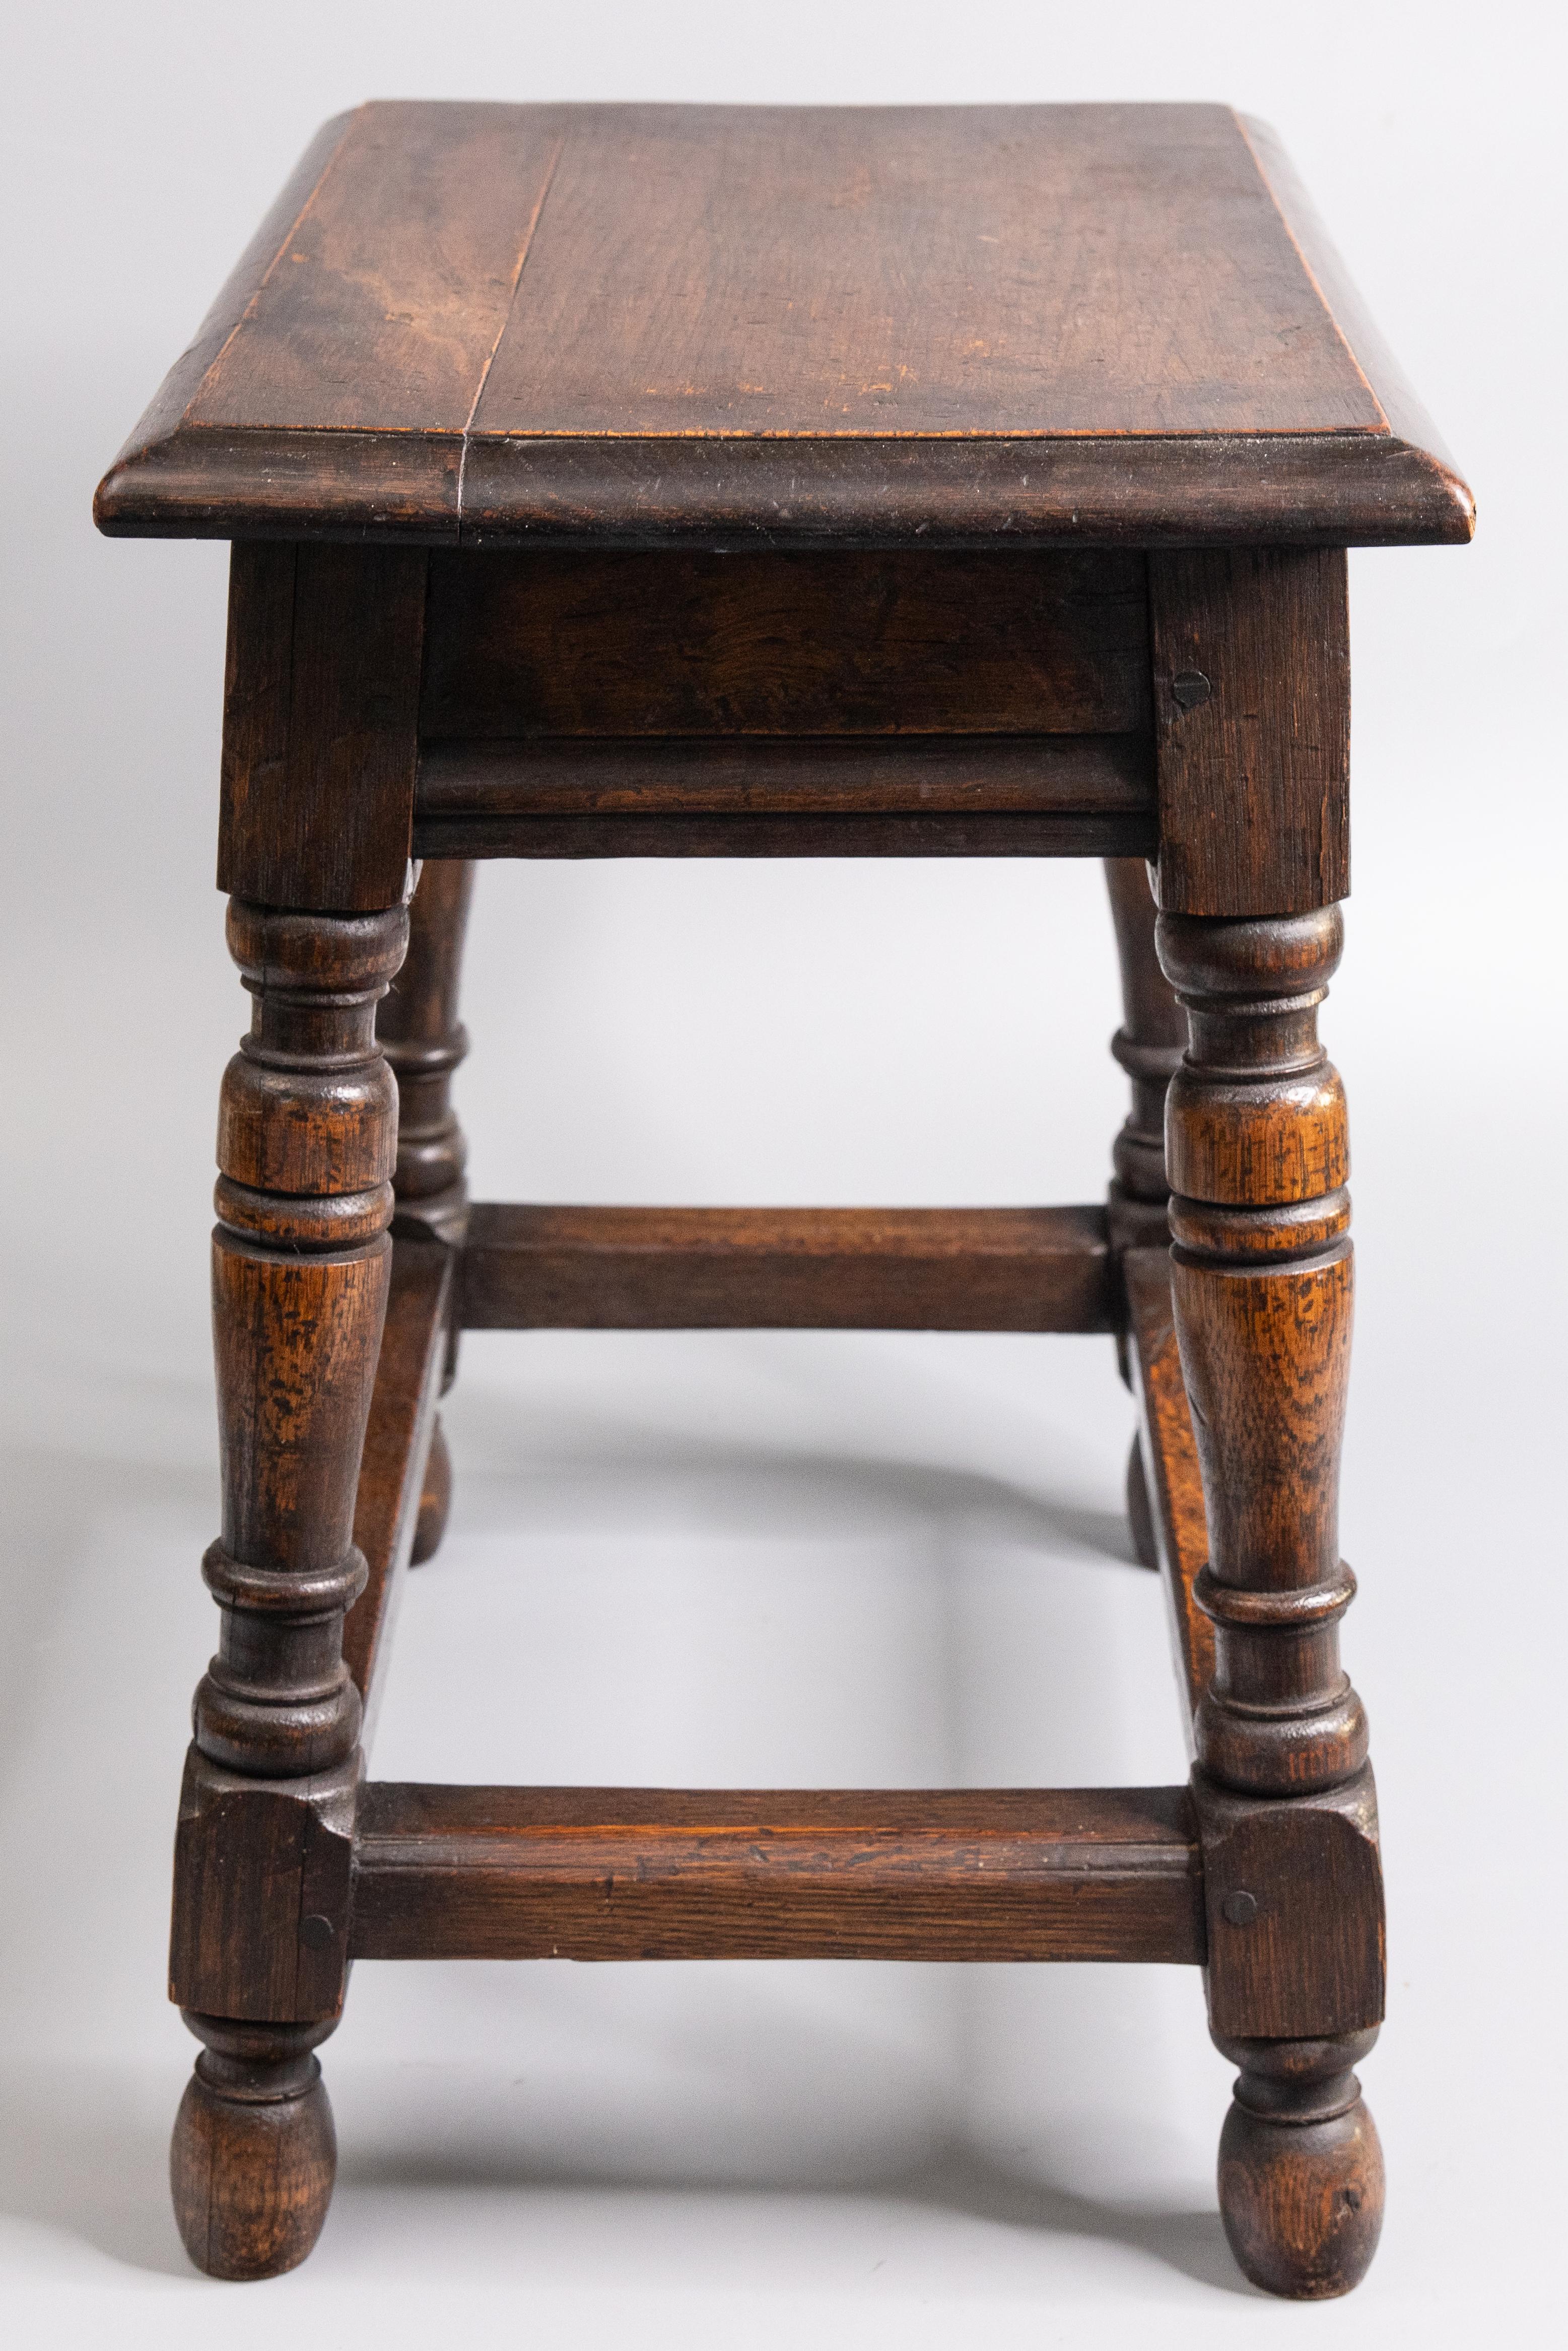 Turned 19th Century English Oak Pegged Joint Stool Side Table For Sale